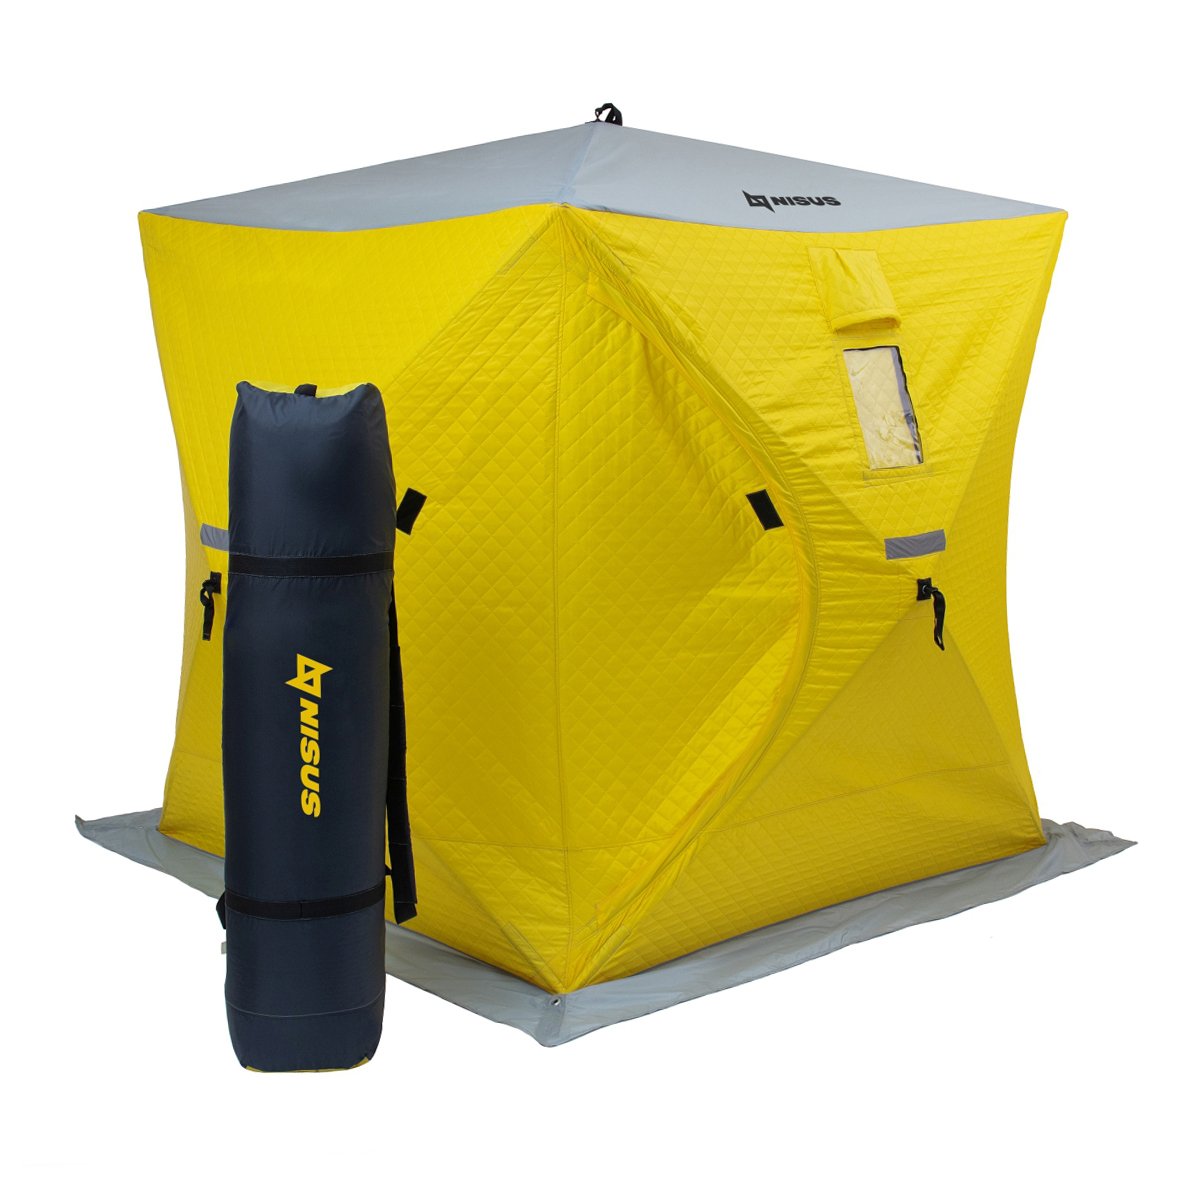 Cube Insulated Pop-Up Ice Fishing Shelter for 2 Persons has a carrying bag attached